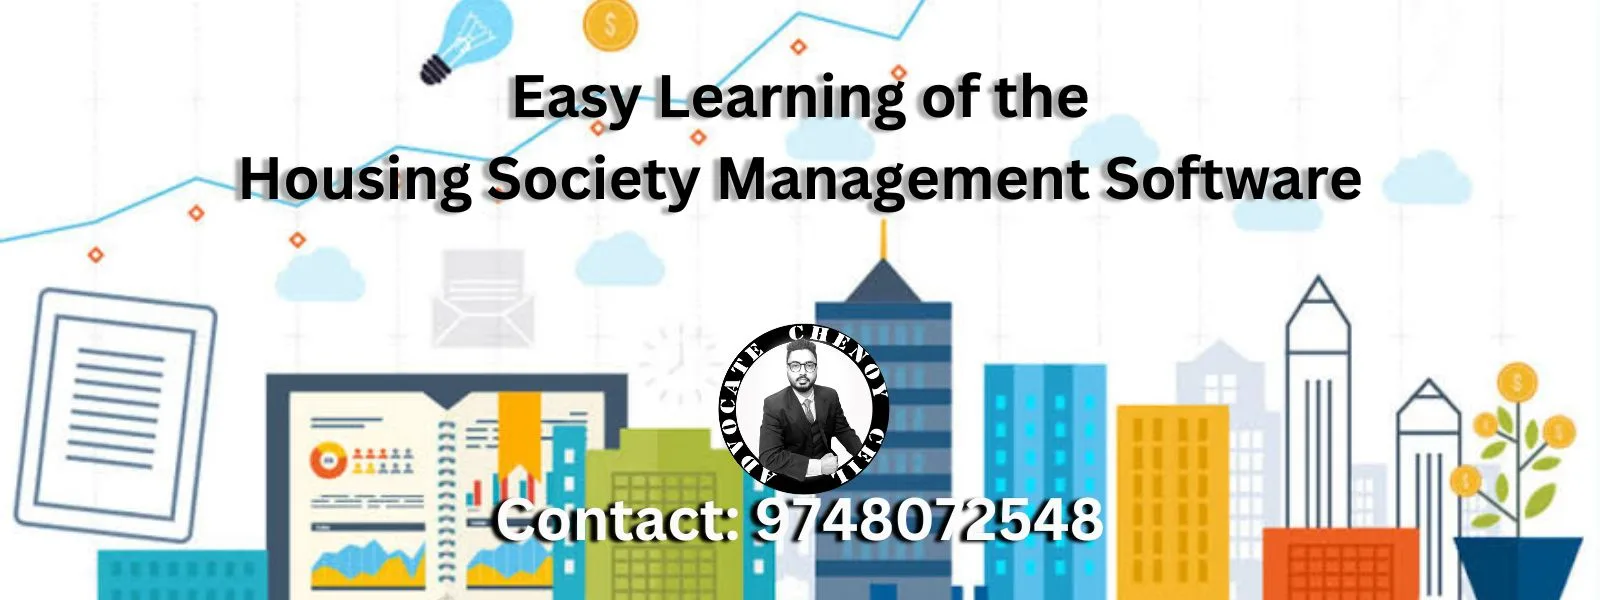 housing society management software